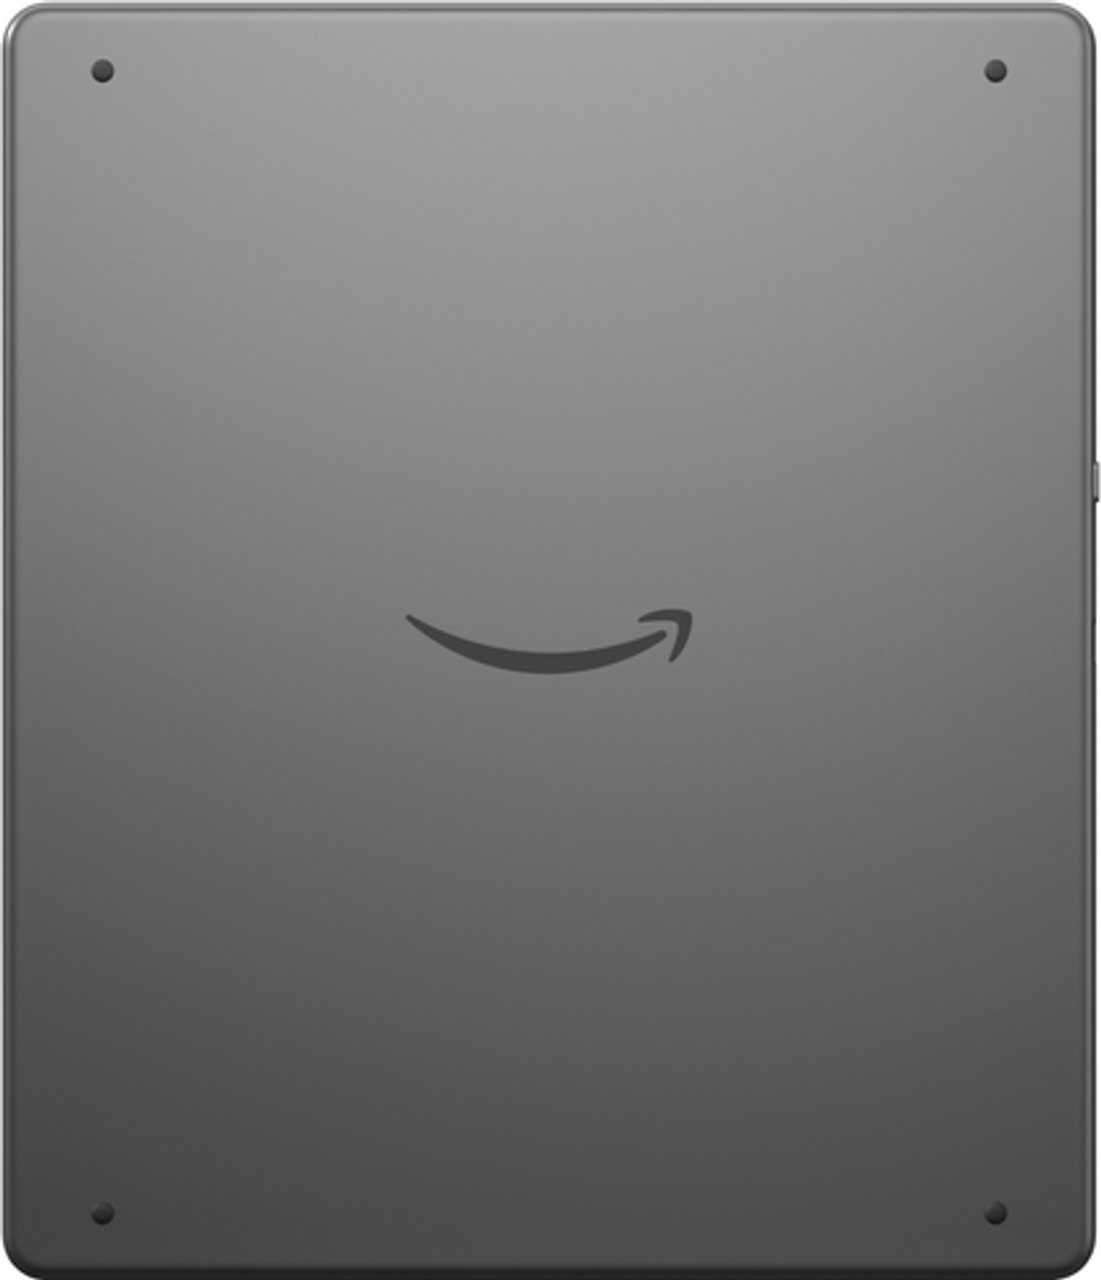 Amazon - Kindle Scribe (64 GB), the first Kindle for reading & writing, with a 10.2” 300 ppi Paperwhite display with Premium Pen - 2022 - Gray